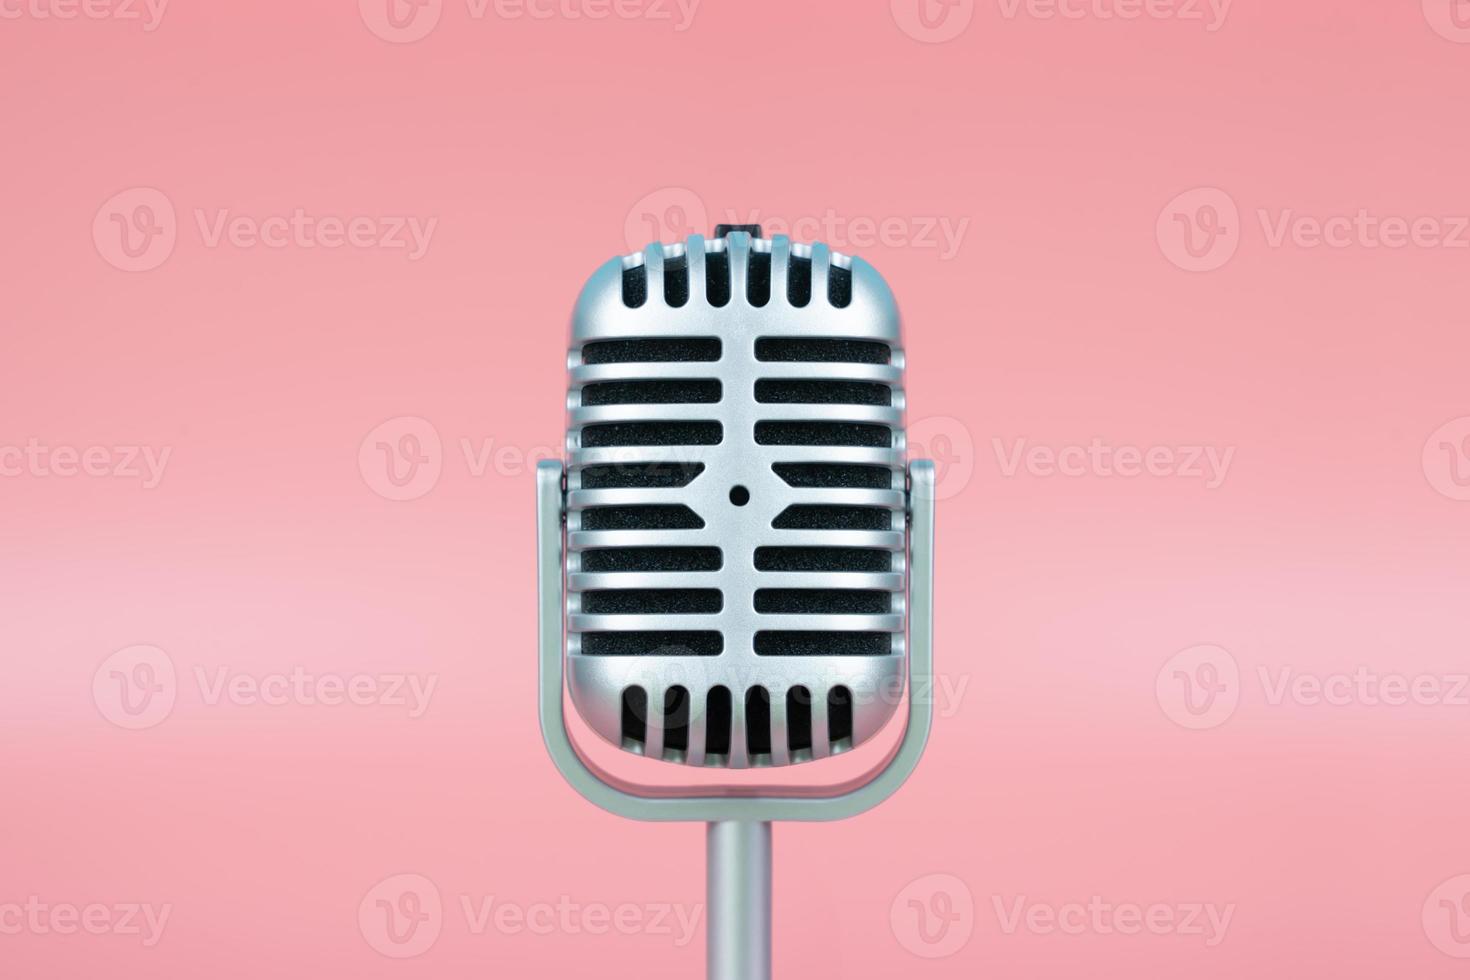 Retro microphone with copy space on pink background photo